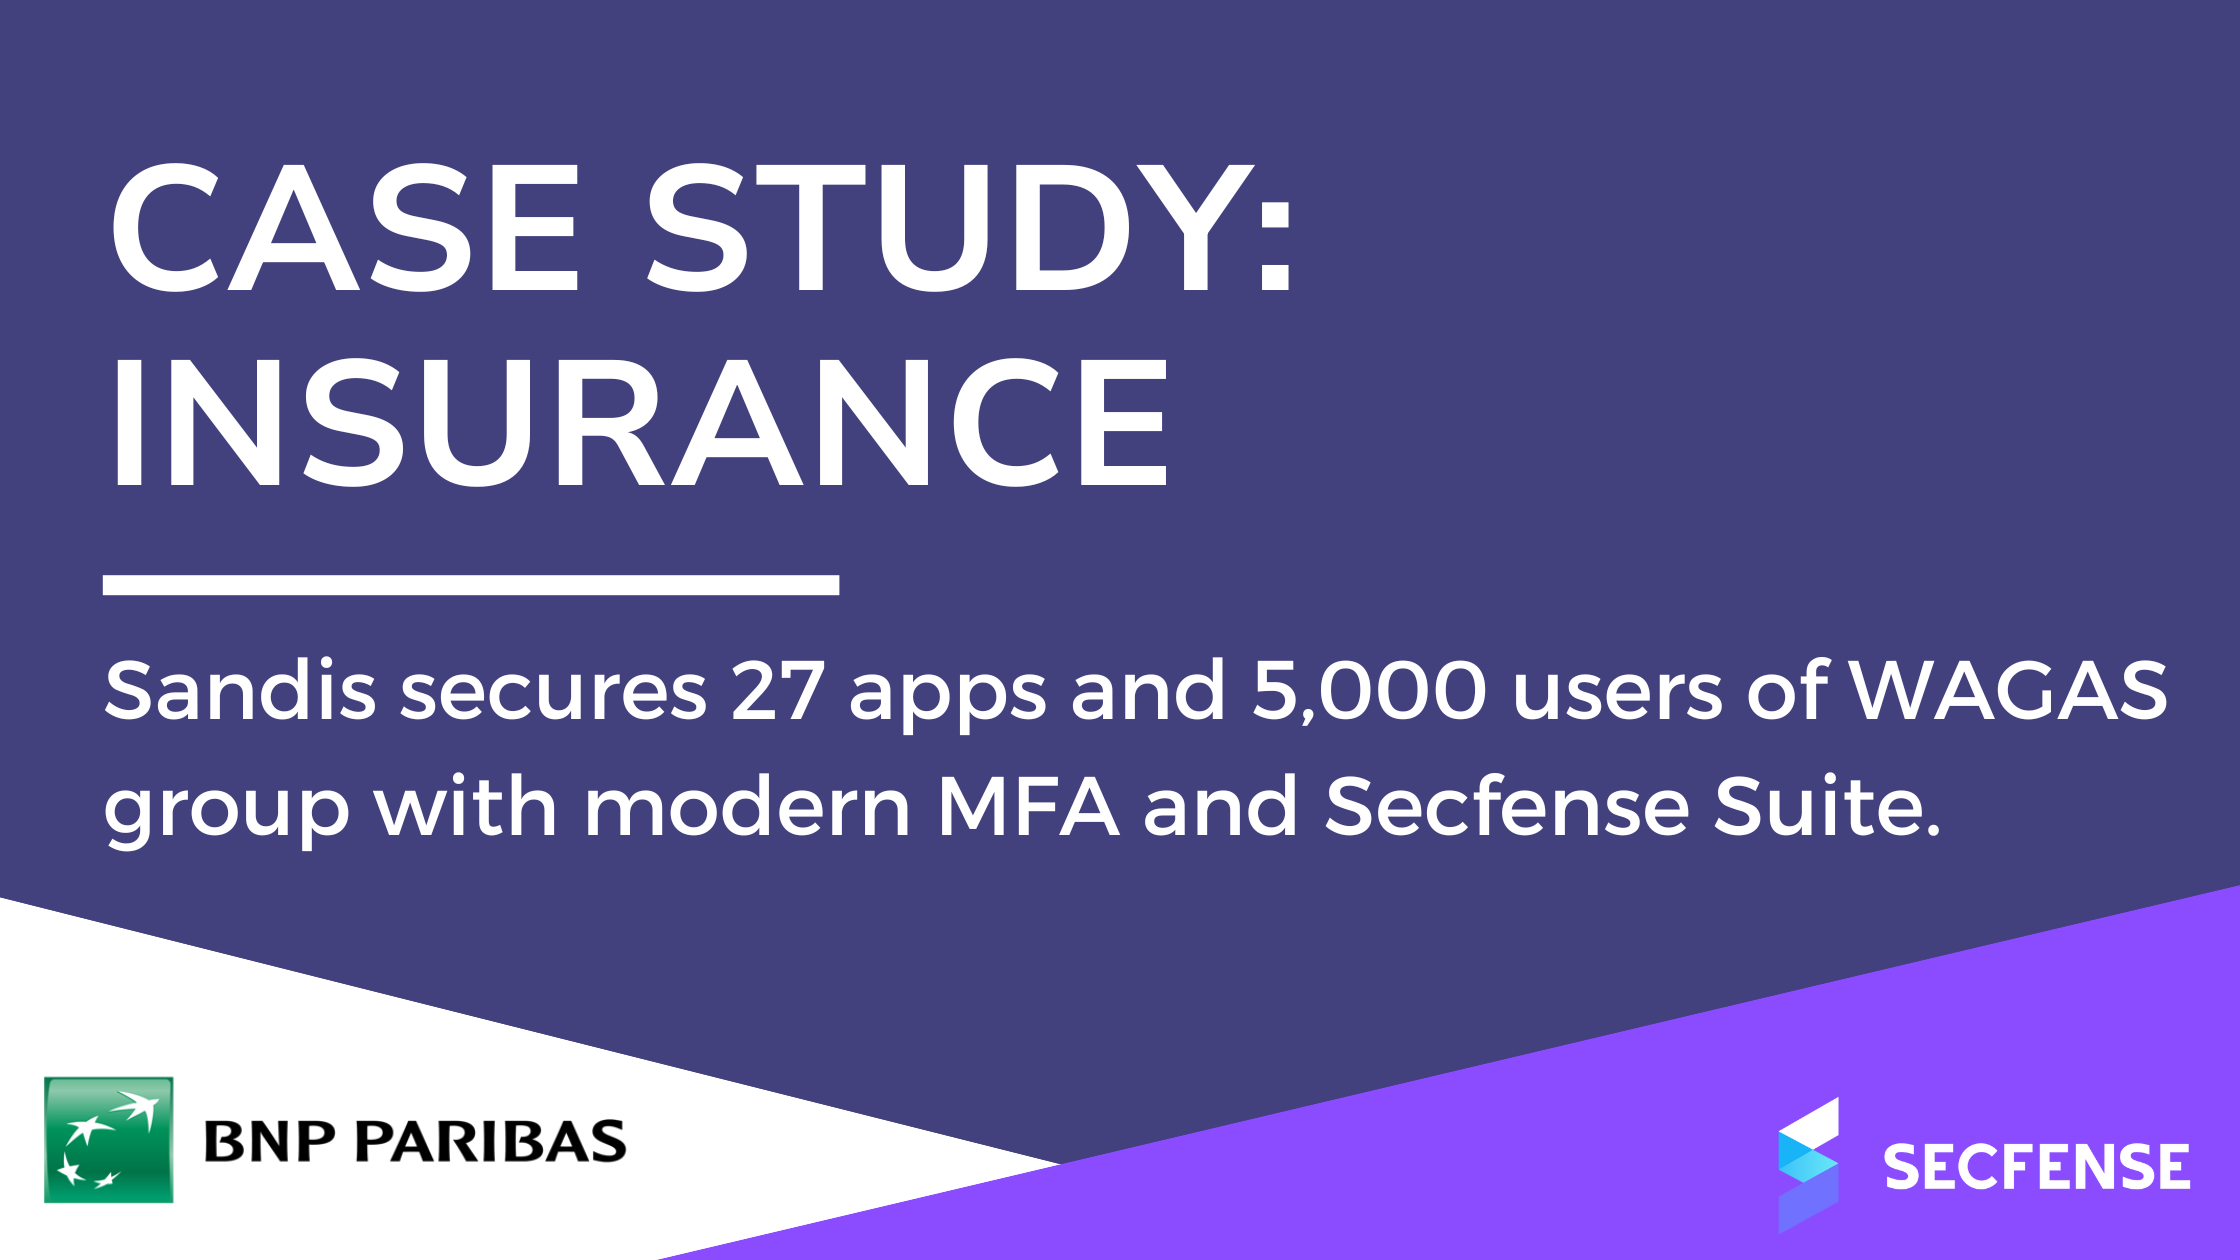 Sandis secures 27 apps and 5,000 users of WAGAS group with modern MFA and Secfense Suite.